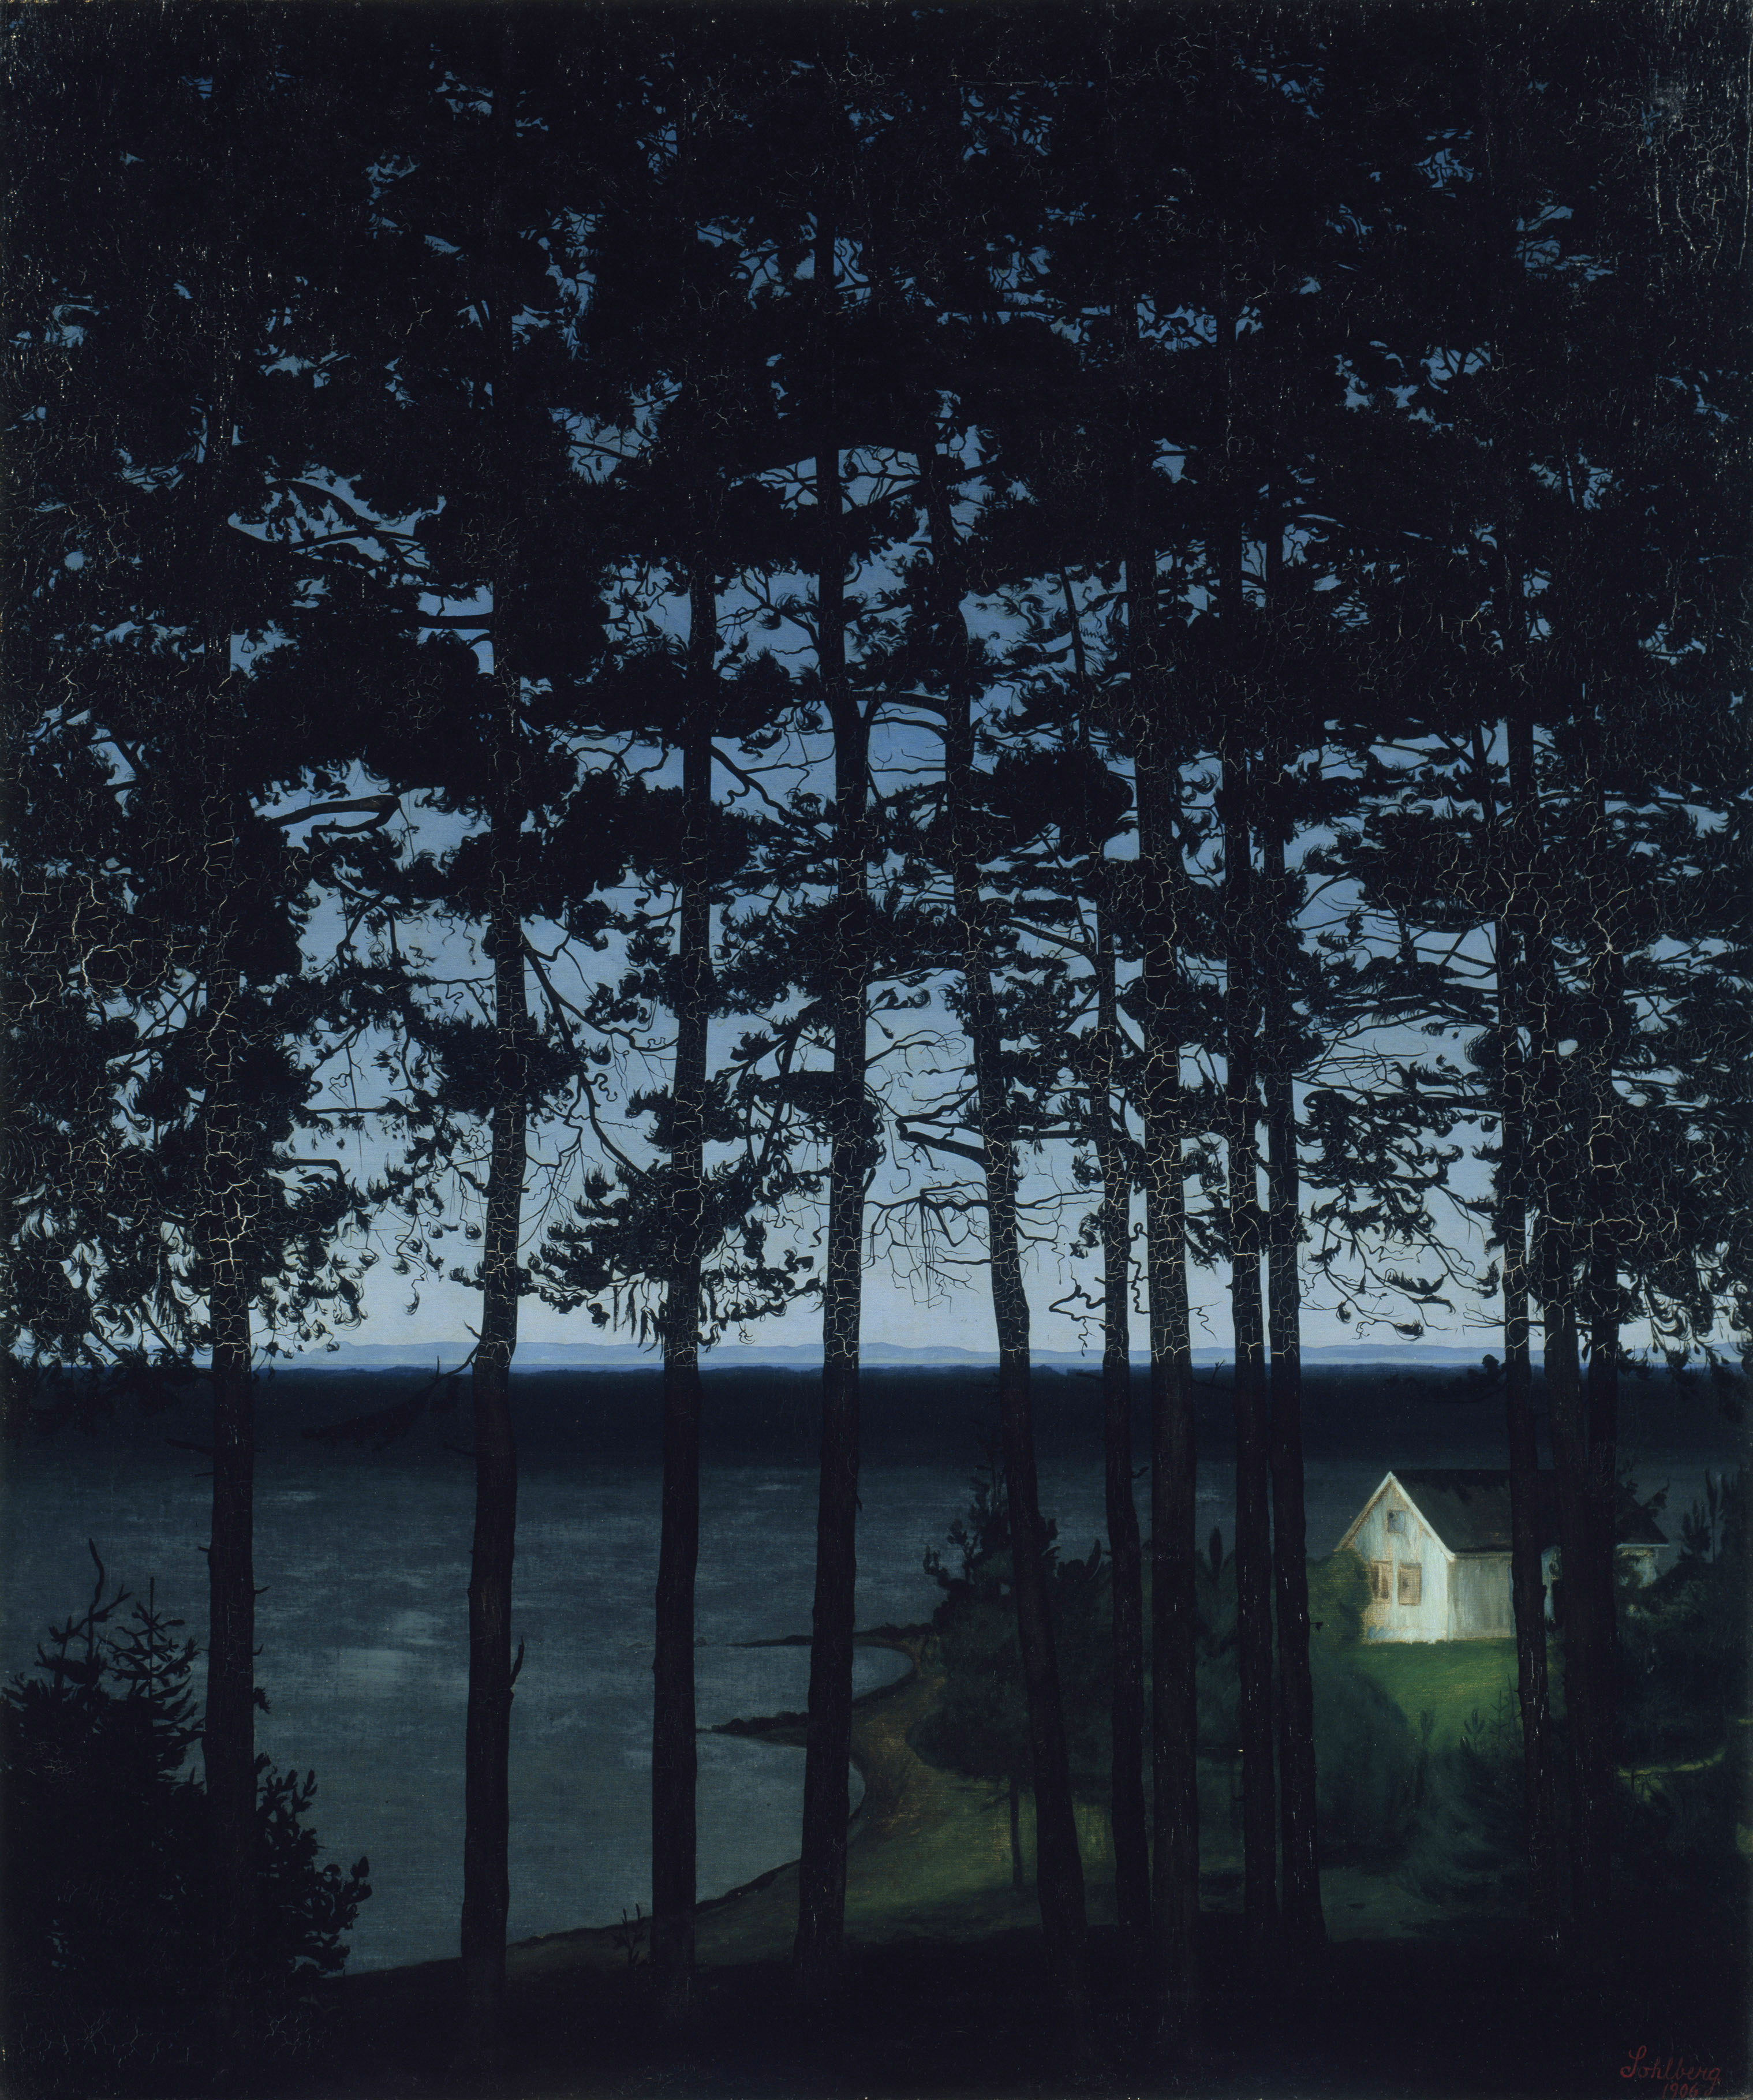 La Maison du Pêcheur by Harald Sohlberg - 1906 Dulwich Picture Gallery